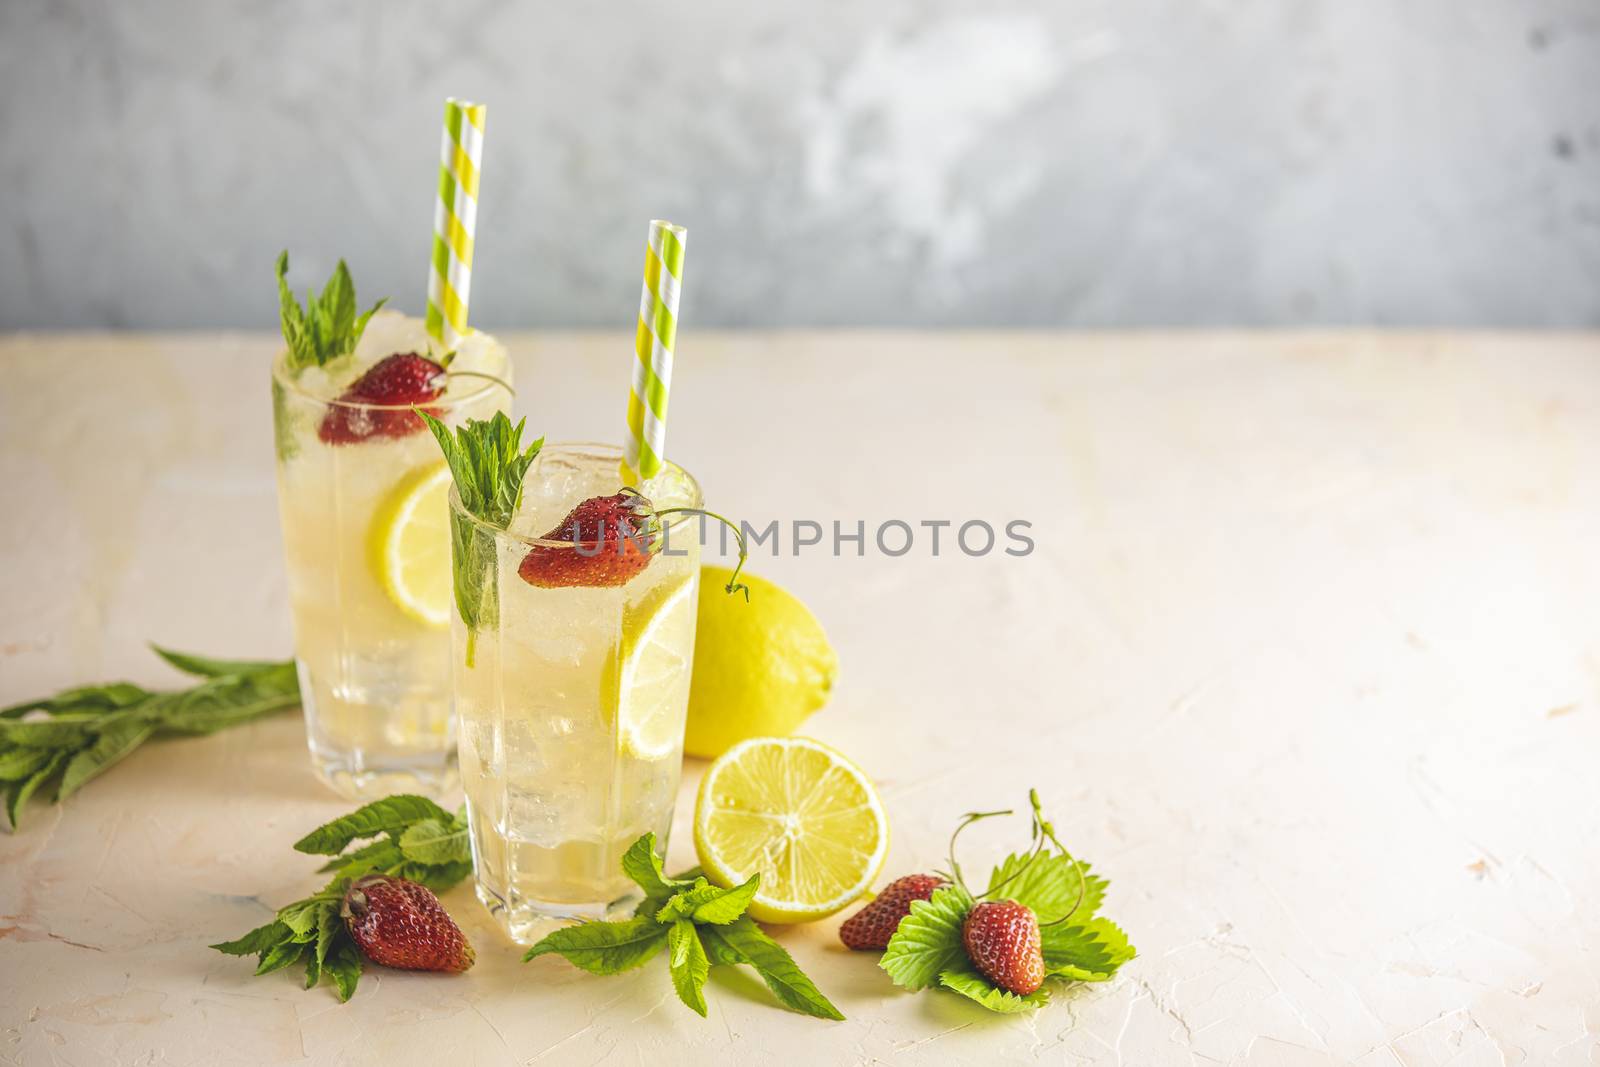 Two glasses of cold icy refreshing drink with lemon and strawber by ArtSvitlyna